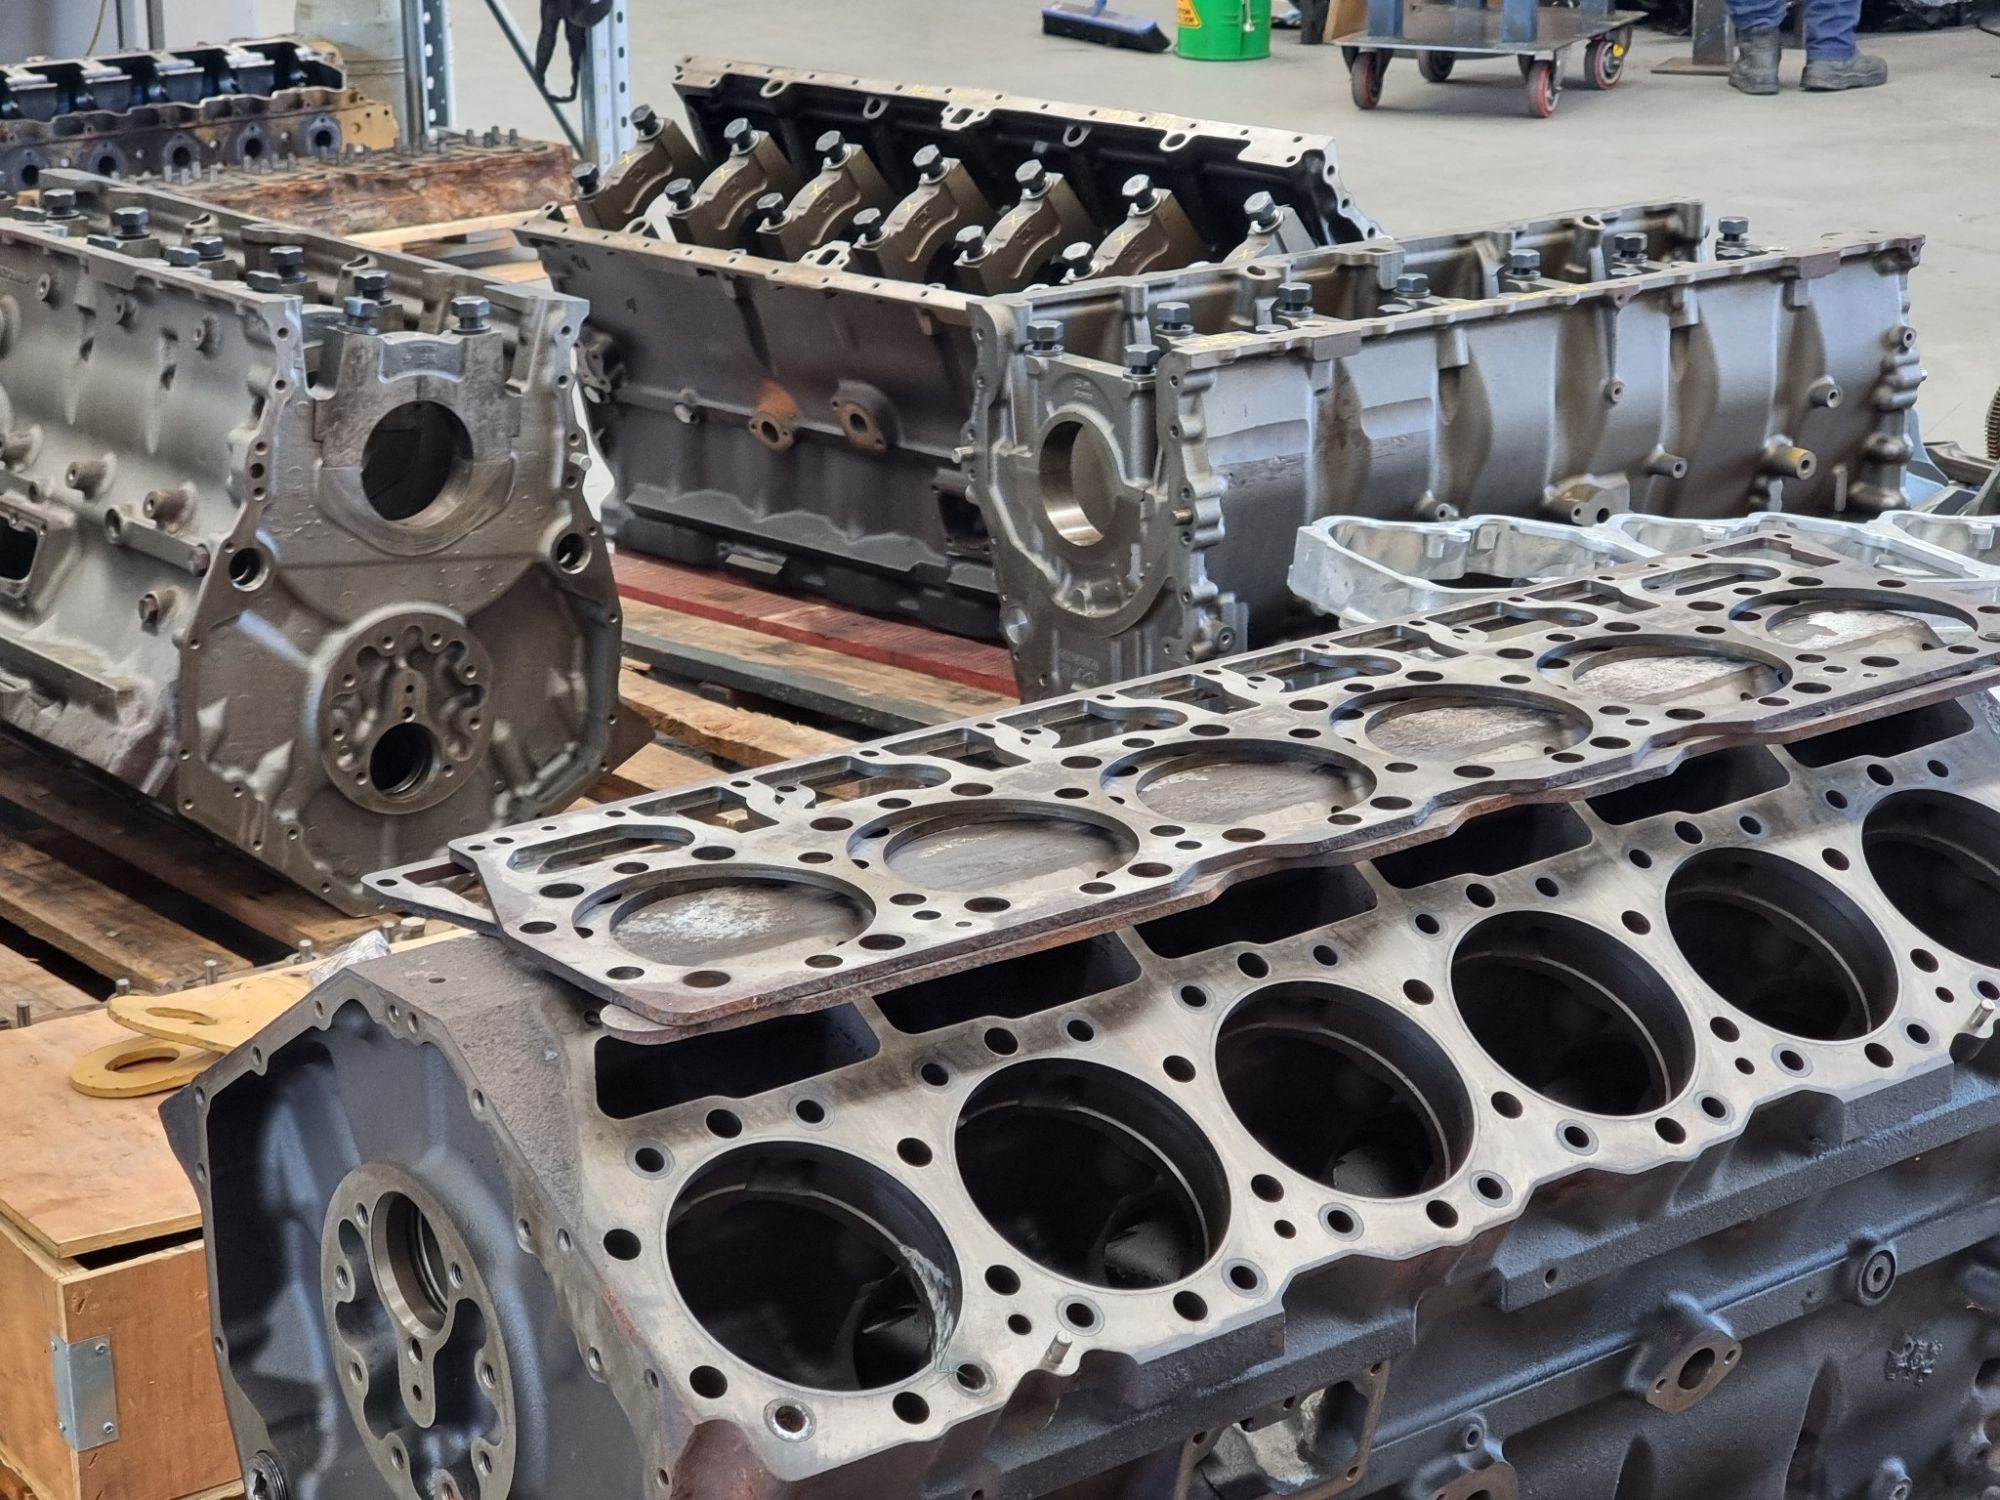 CaterpillarÂ® Used C32 Parts From Second Hand Engine Blocks For Sale